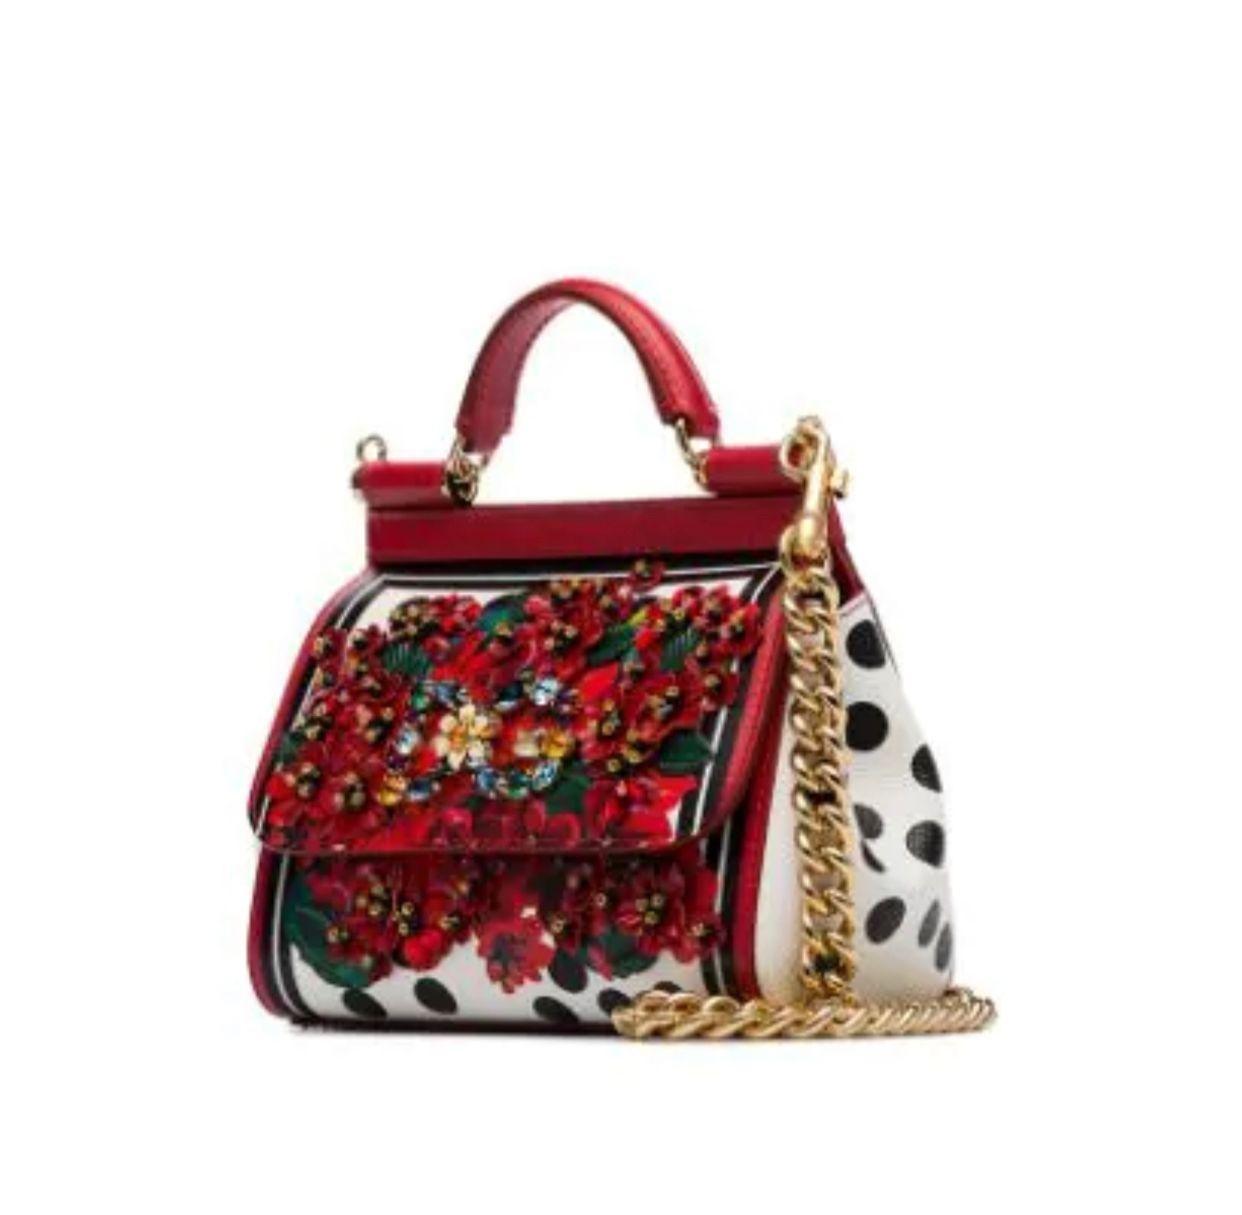 Inspired by the geraniums of Sicilian
gardens and terraces, the Sicily mini
bag is made from printed Dauphine
calfskin which is then hand-
embroidered with multicolored crystals
on the front panel. The print in warm
and vibrant colors and the